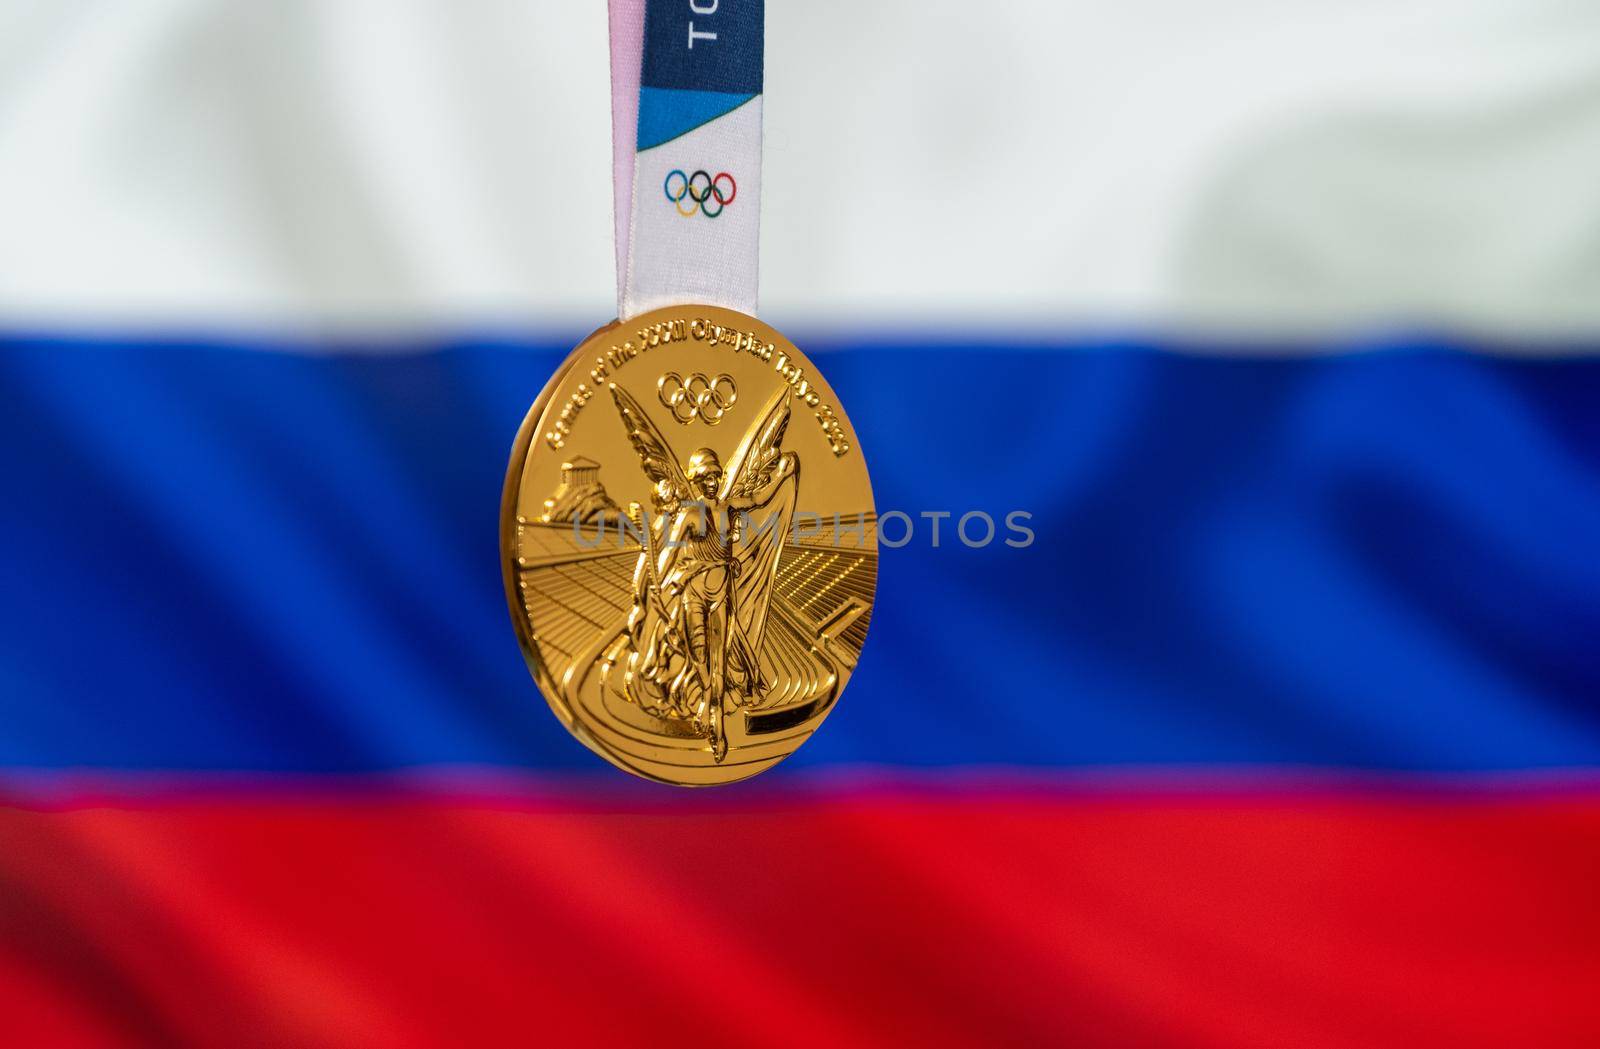 April 25, 2021 Tokyo, Japan. Gold medal of the XXXII Summer Olympic Games 2020 in Tokyo on the background of the flag of Russia.